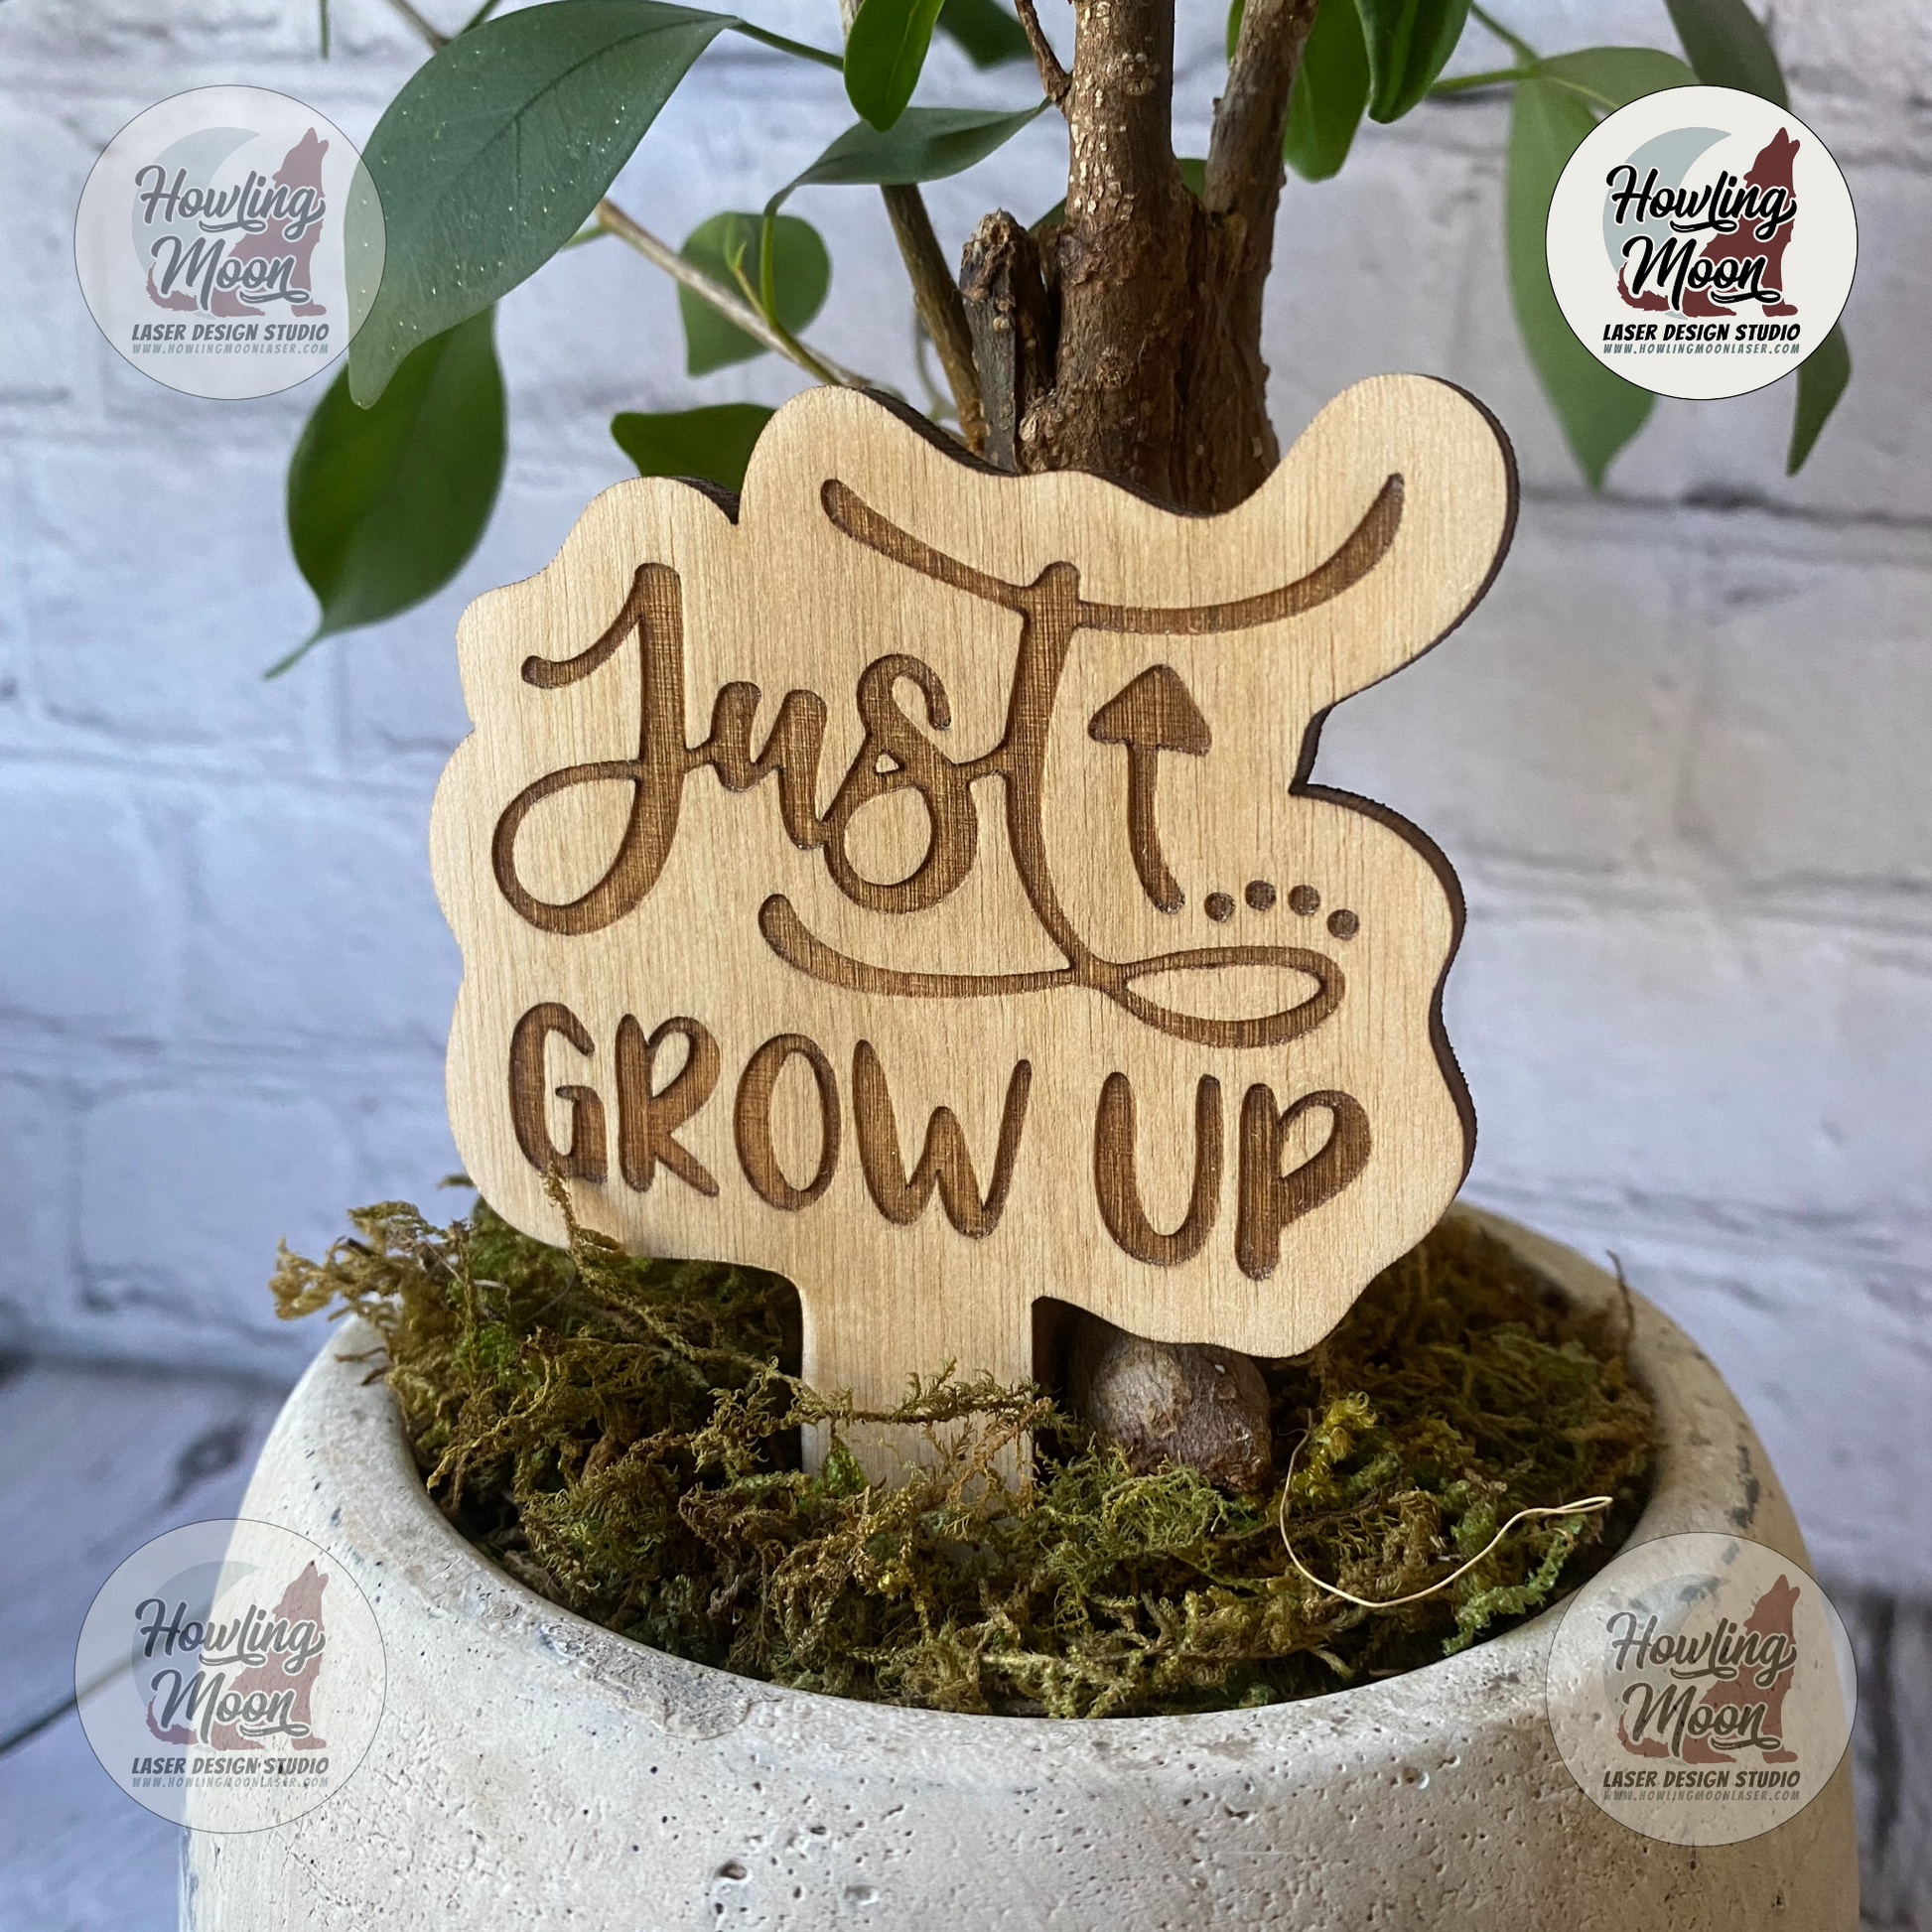 Just Grow Up Funny Plant Marker Howling Moon Laser Design Virginia USA